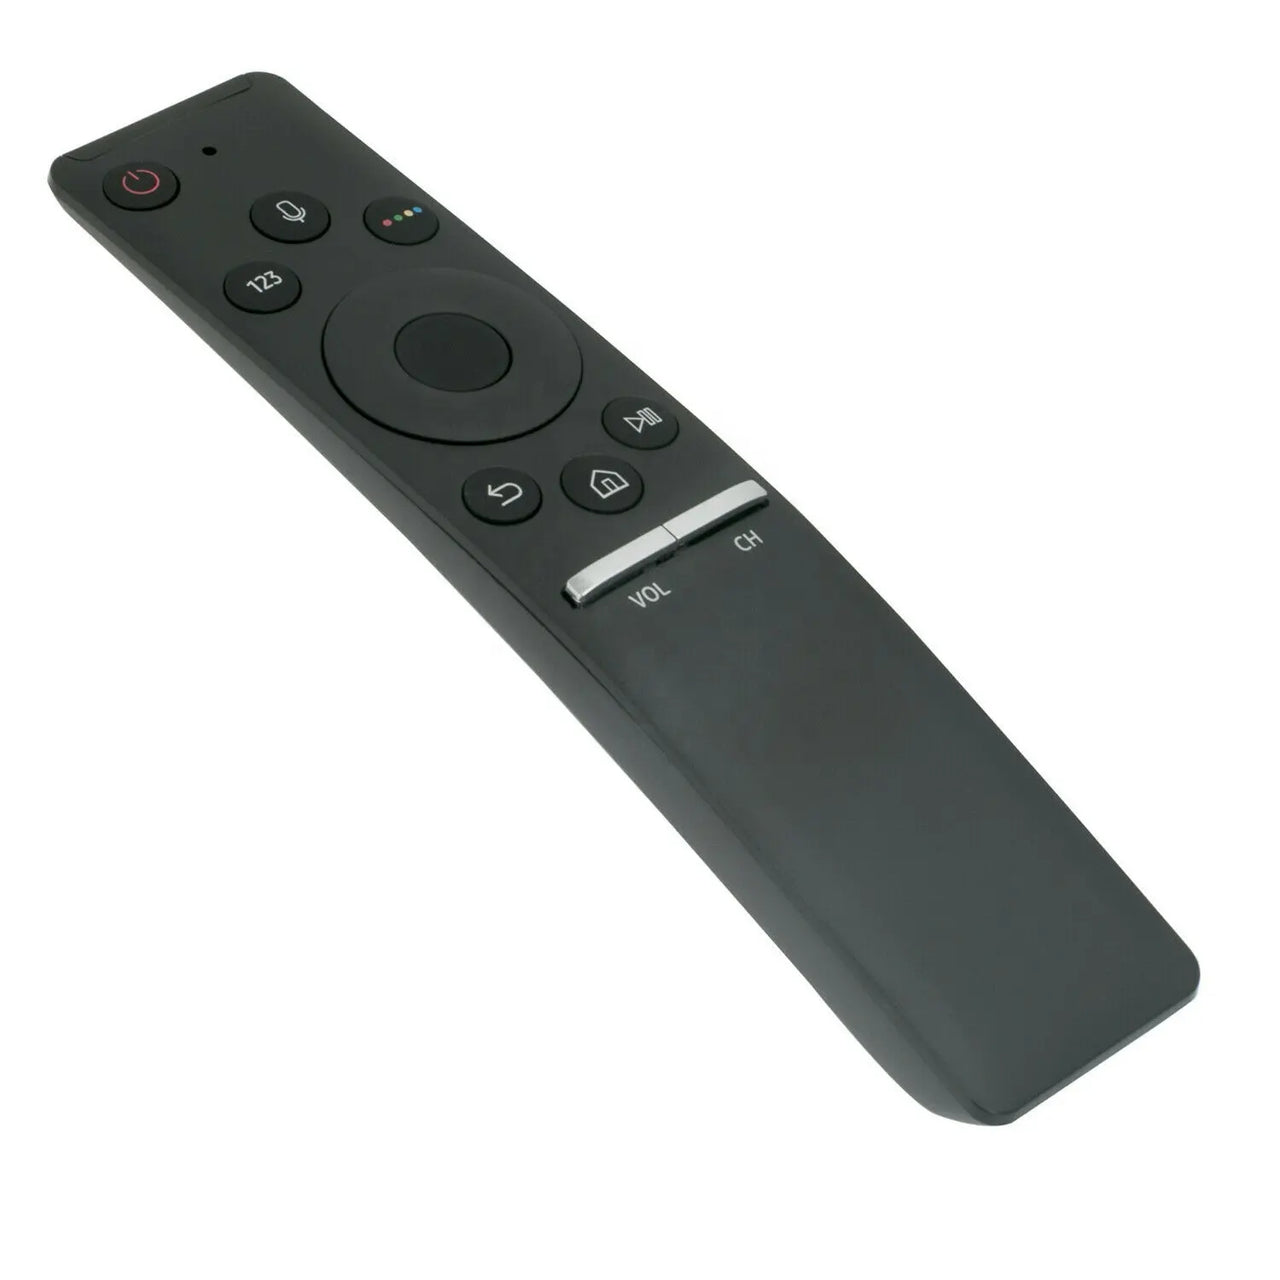 BN59-01298C Replacement Remote With Voice for Samsung Televisions BN59-01298D BN59-01298A